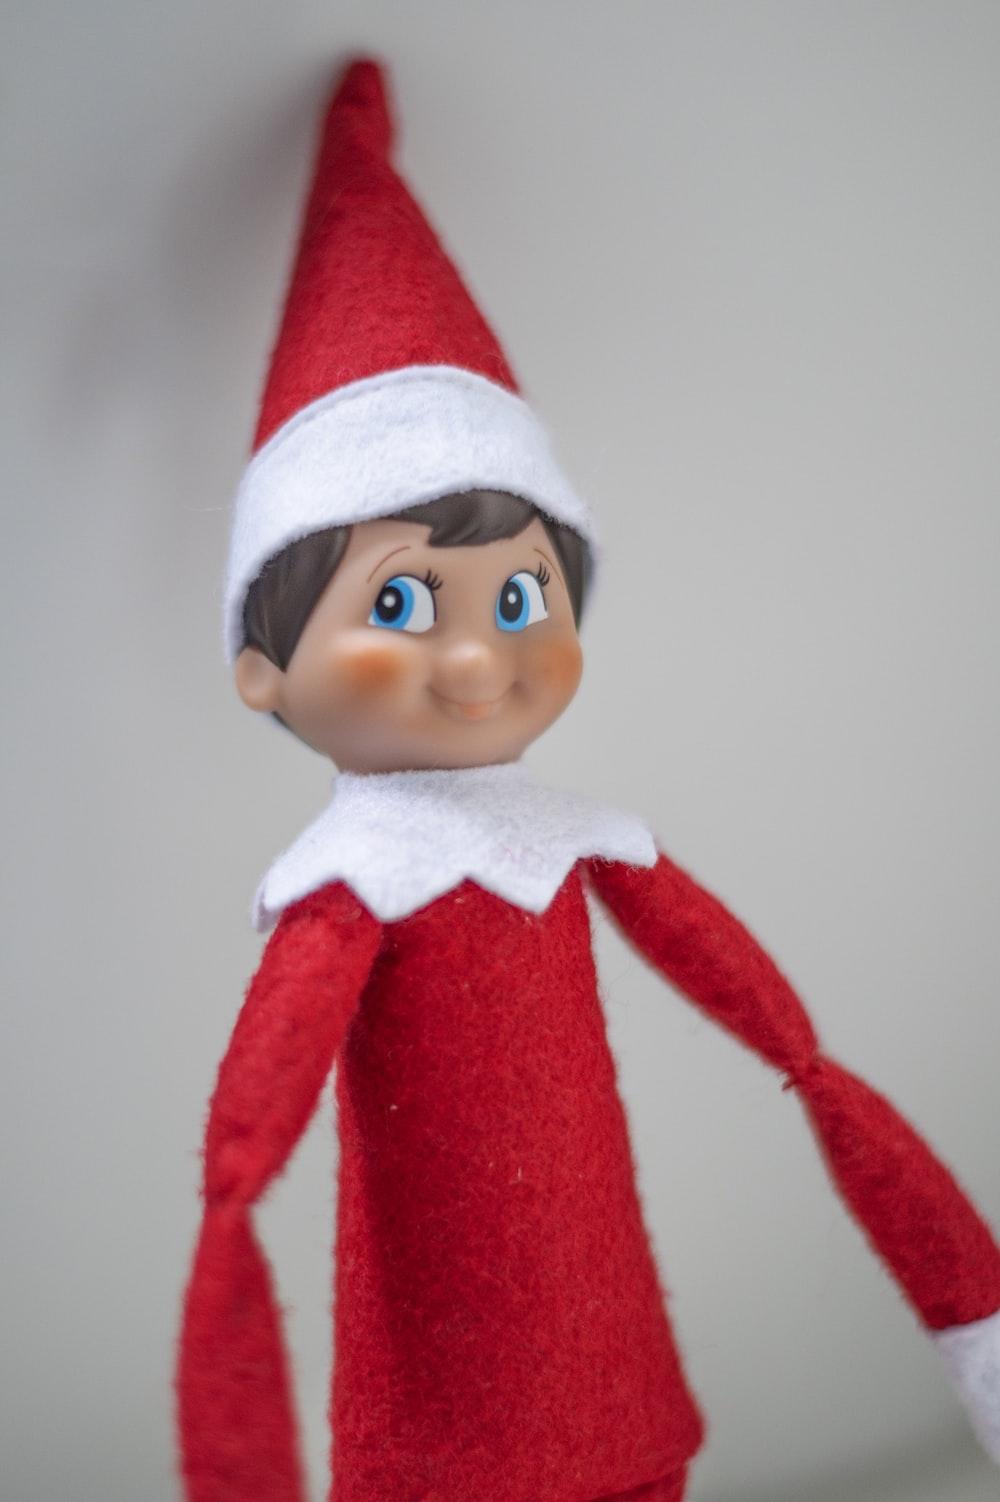 Elf On The Shelf Pictures Download Free Images on